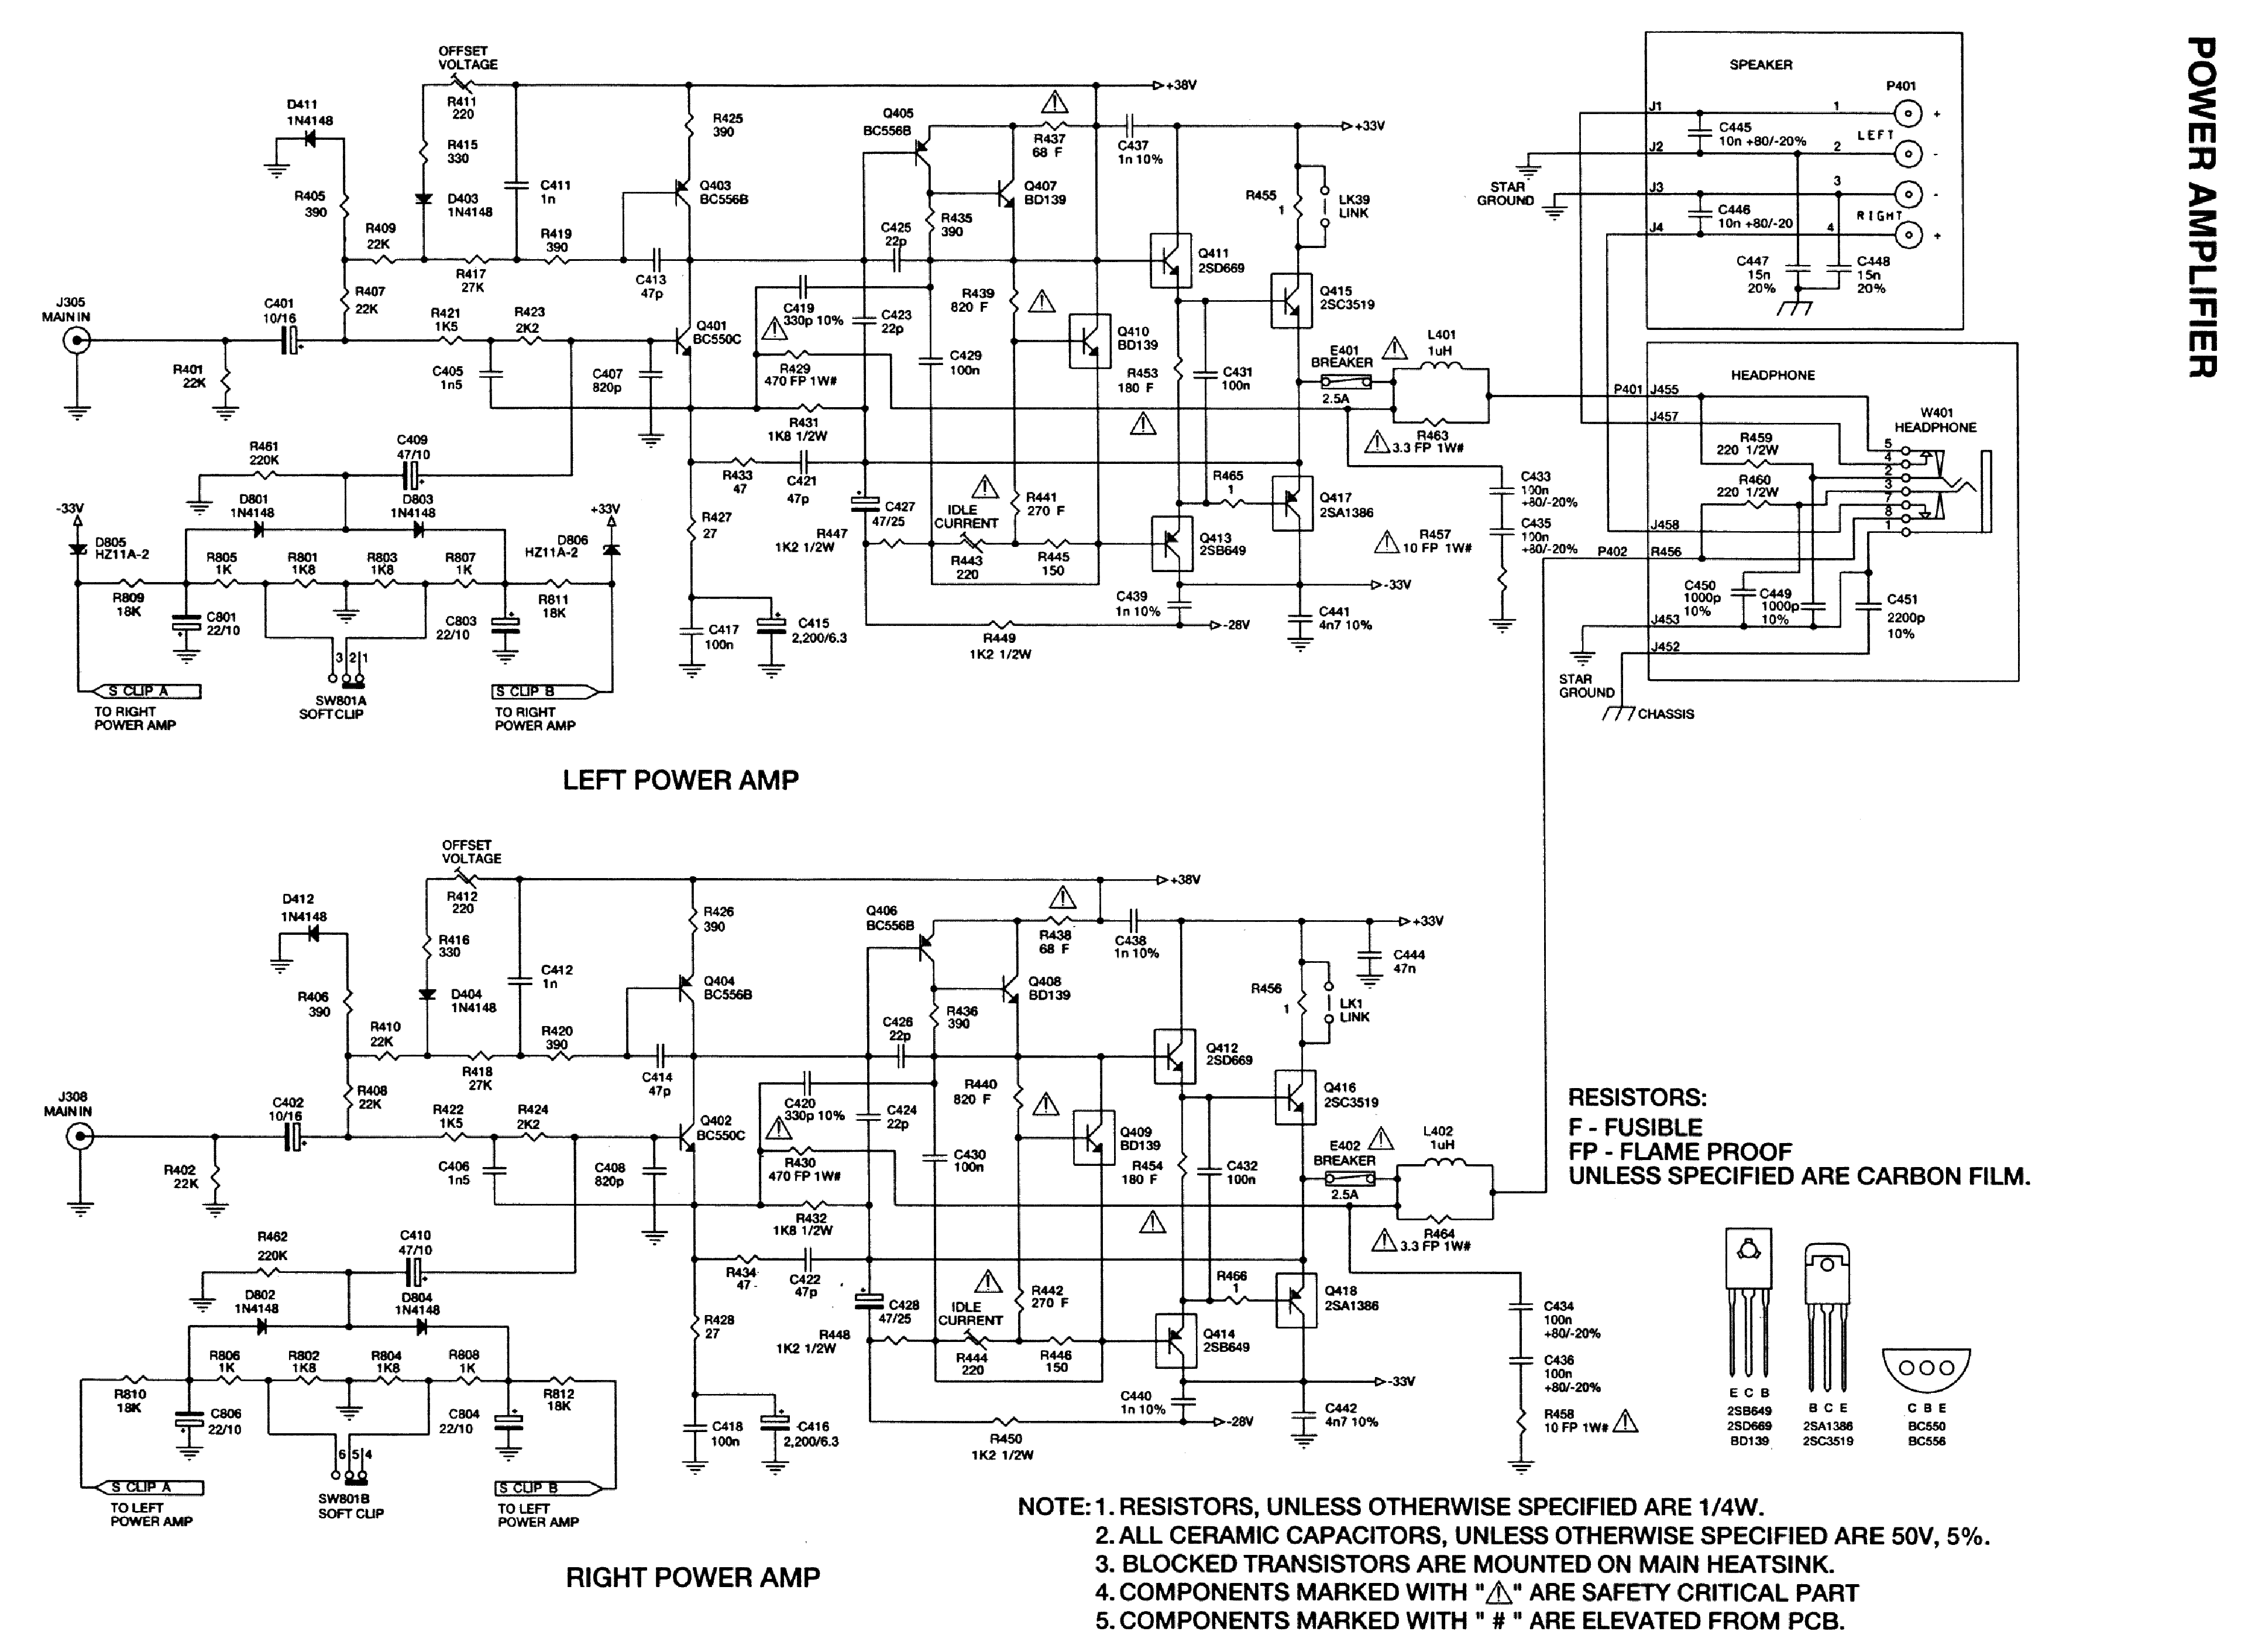 NAD 312 SCH service manual (1st page)